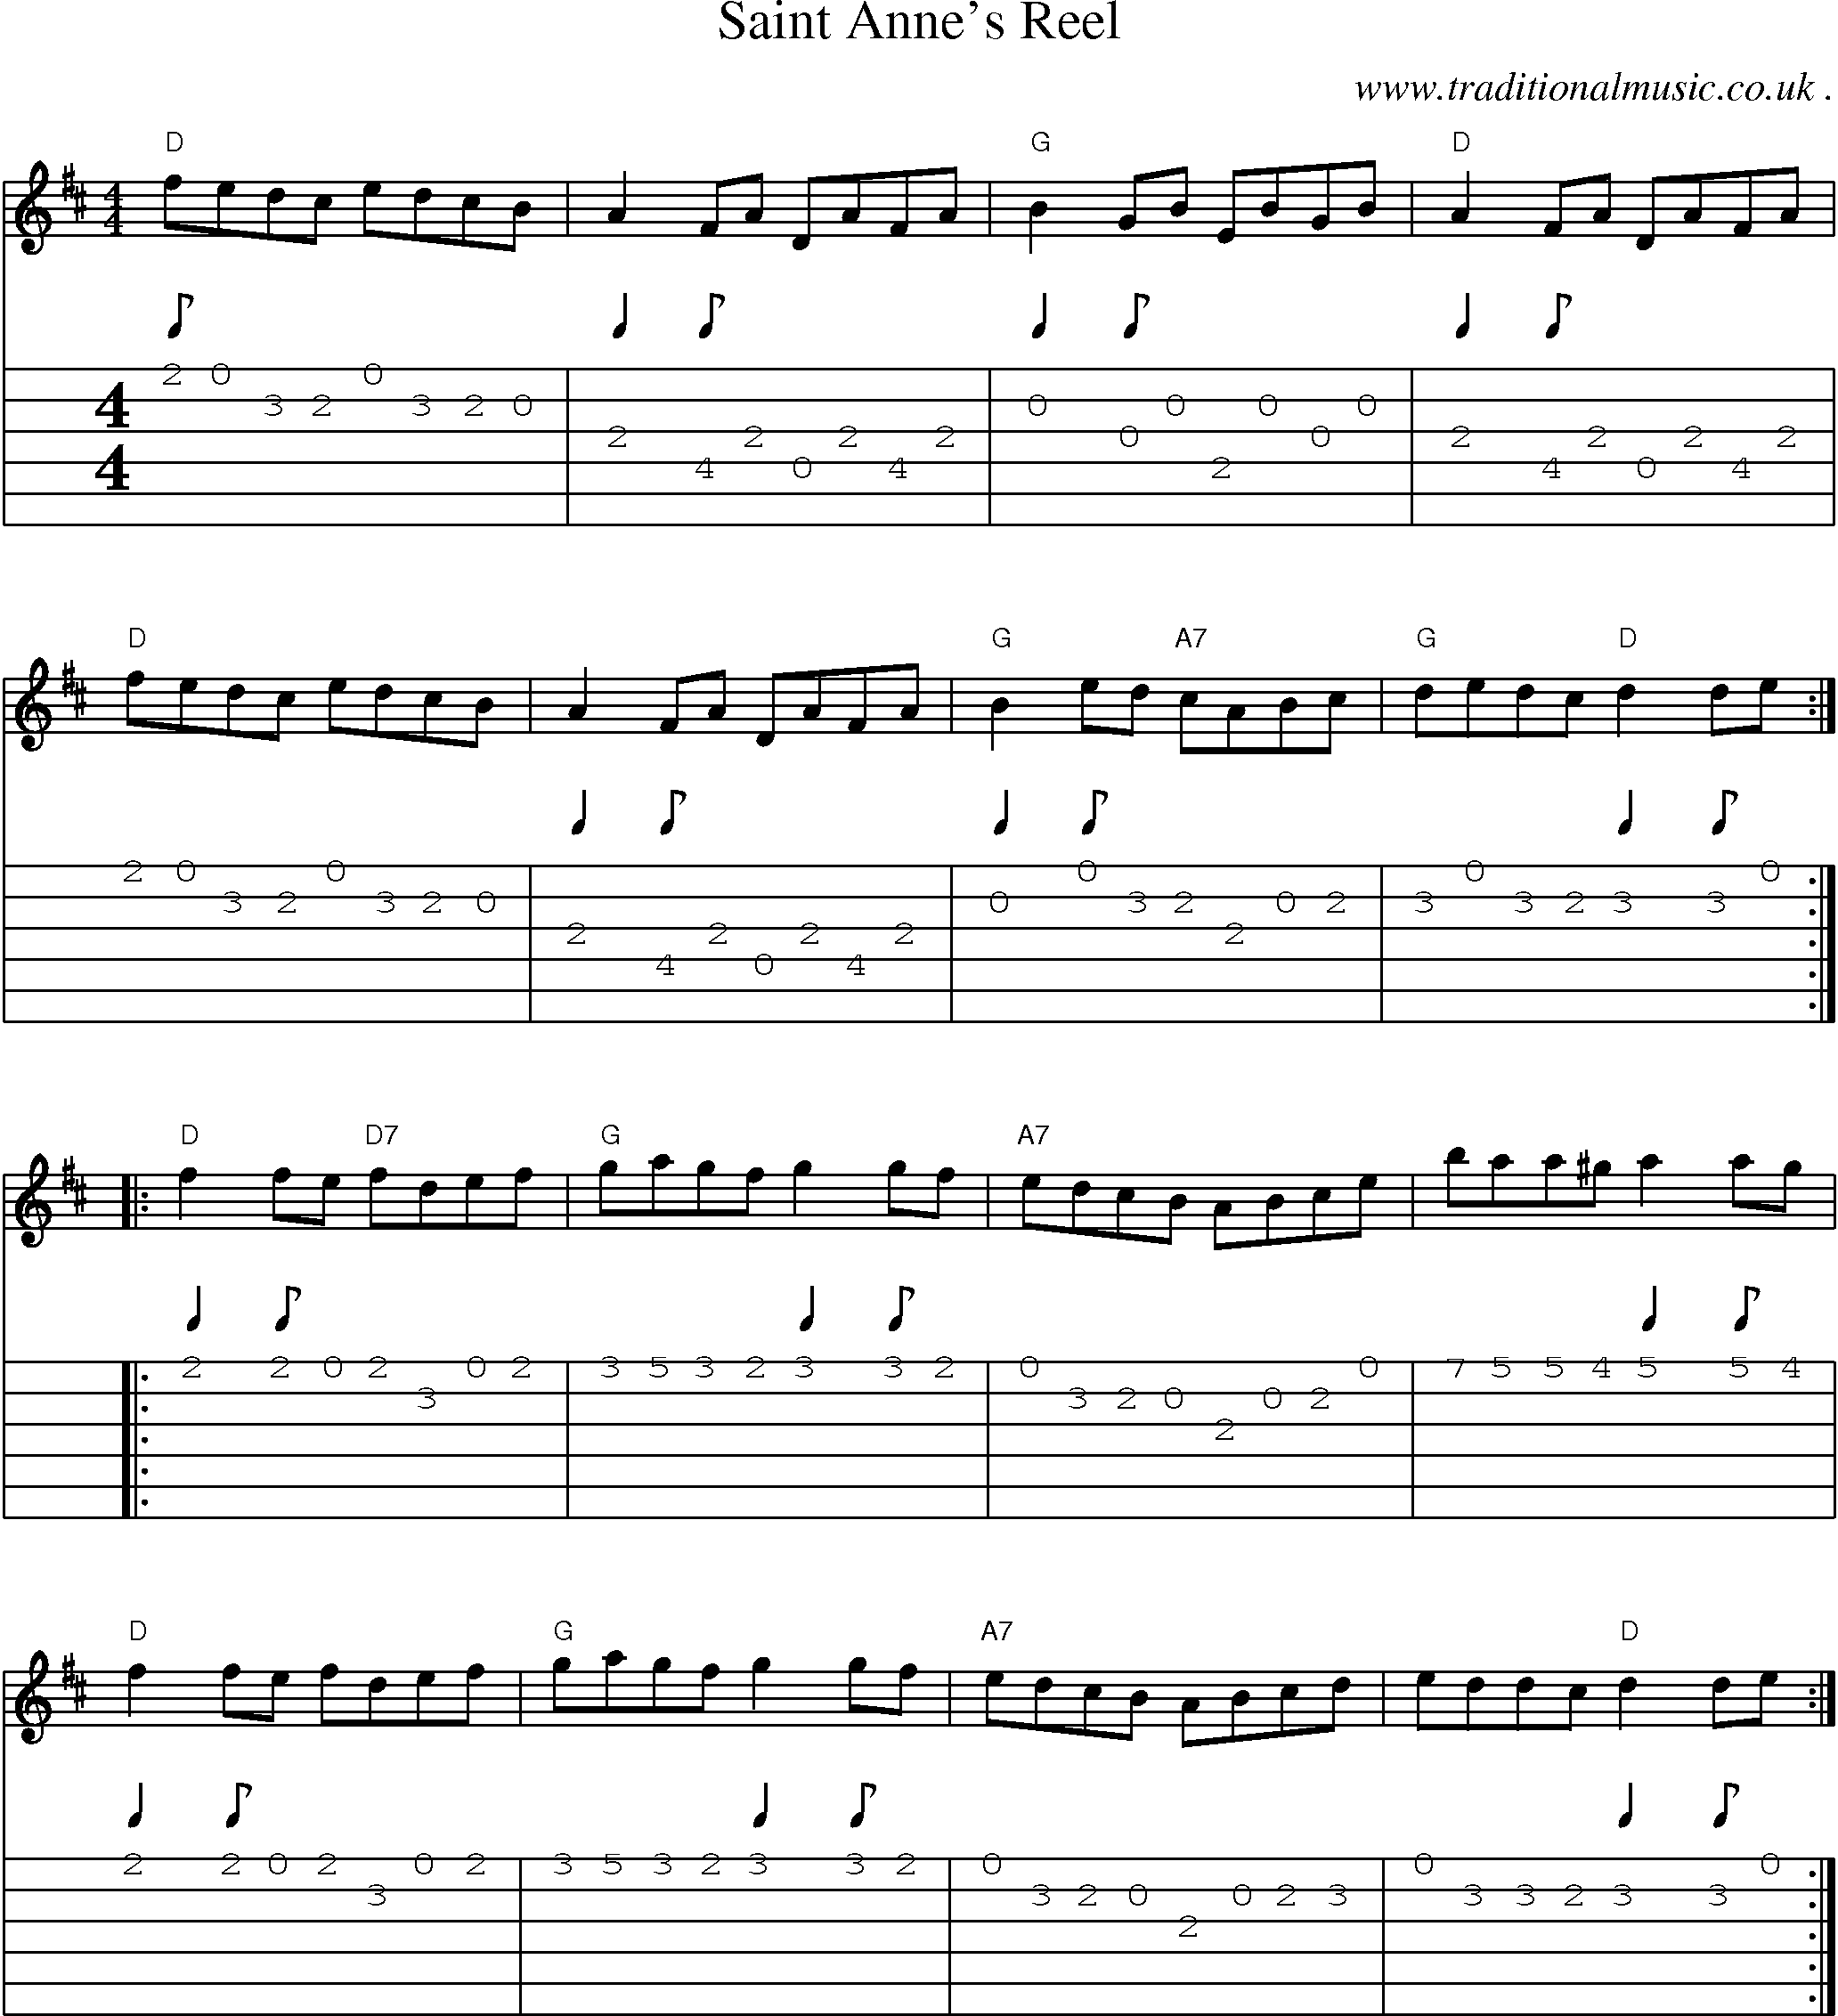 Music Score and Guitar Tabs for Saint Annes Reel